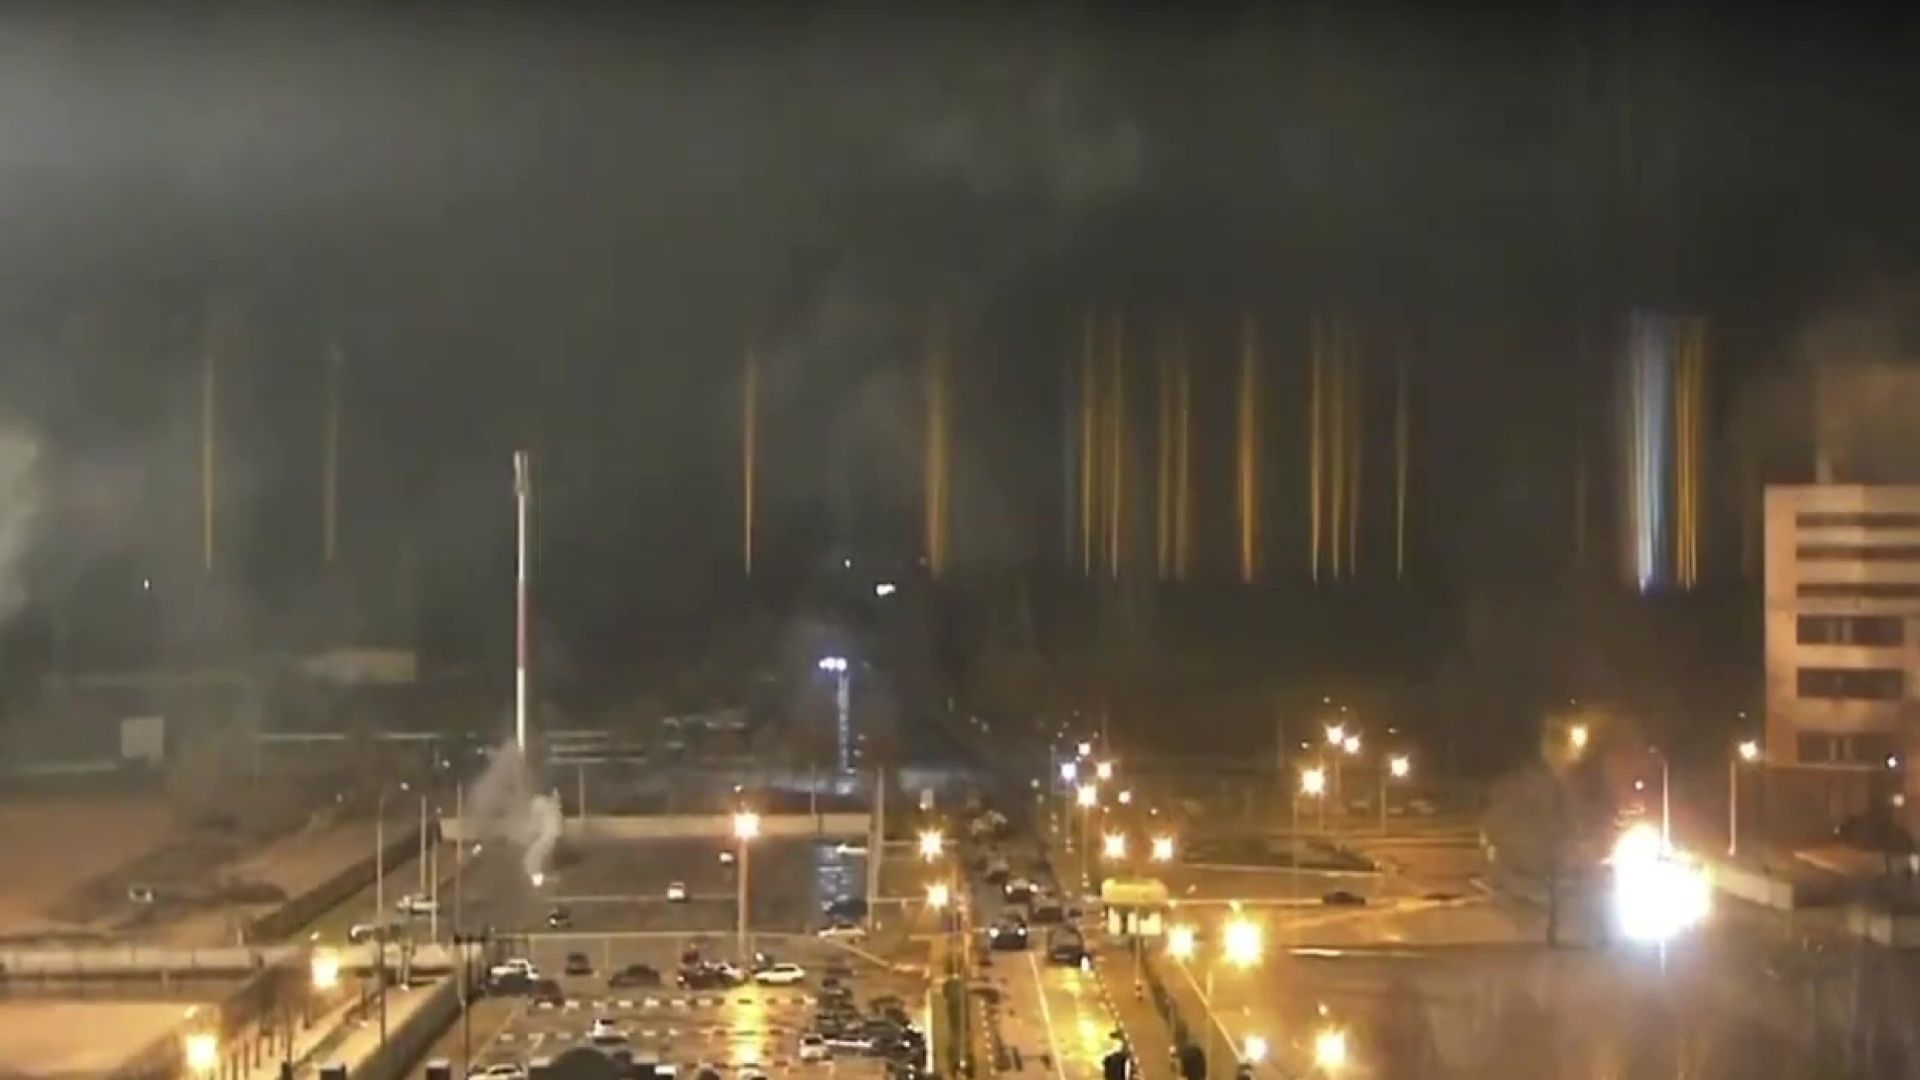 A screen grab captured from a video shows a view of Zaporizhzhia nuclear power plant during a fire following clashes around the site in Zaporizhzhia, Ukraine on March 4